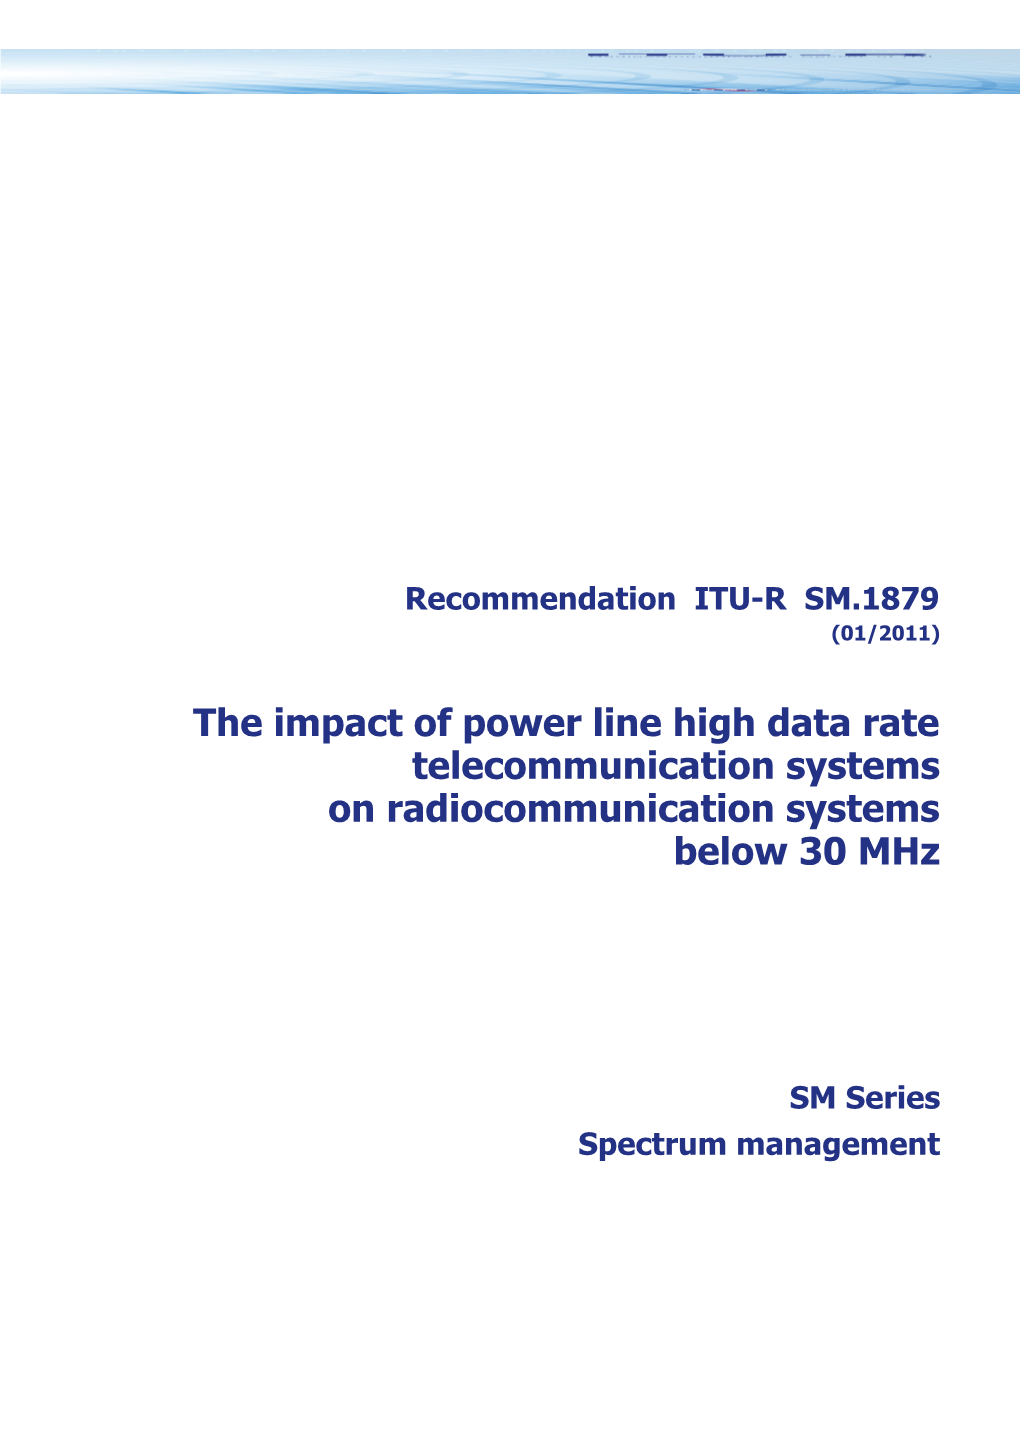 RECOMMENDATION ITU-R SM.1879* - the Impact of Power Line High Data Rate Telecommunication